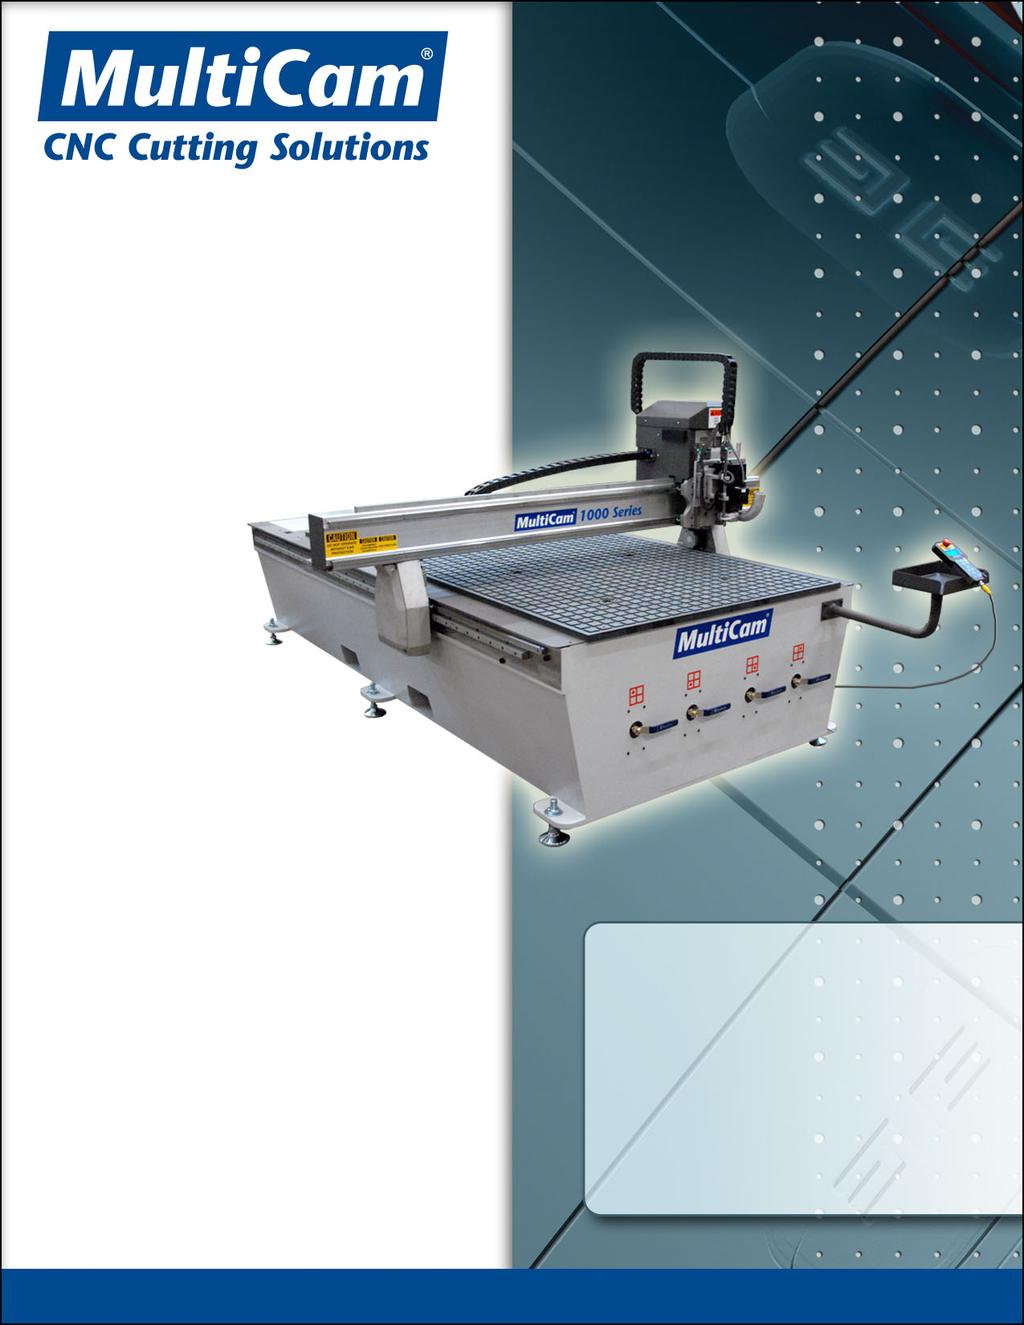 MultiCam 1000 Series CNC Router Feature and Specification Guide Maximum Flexibility Made Affordable!